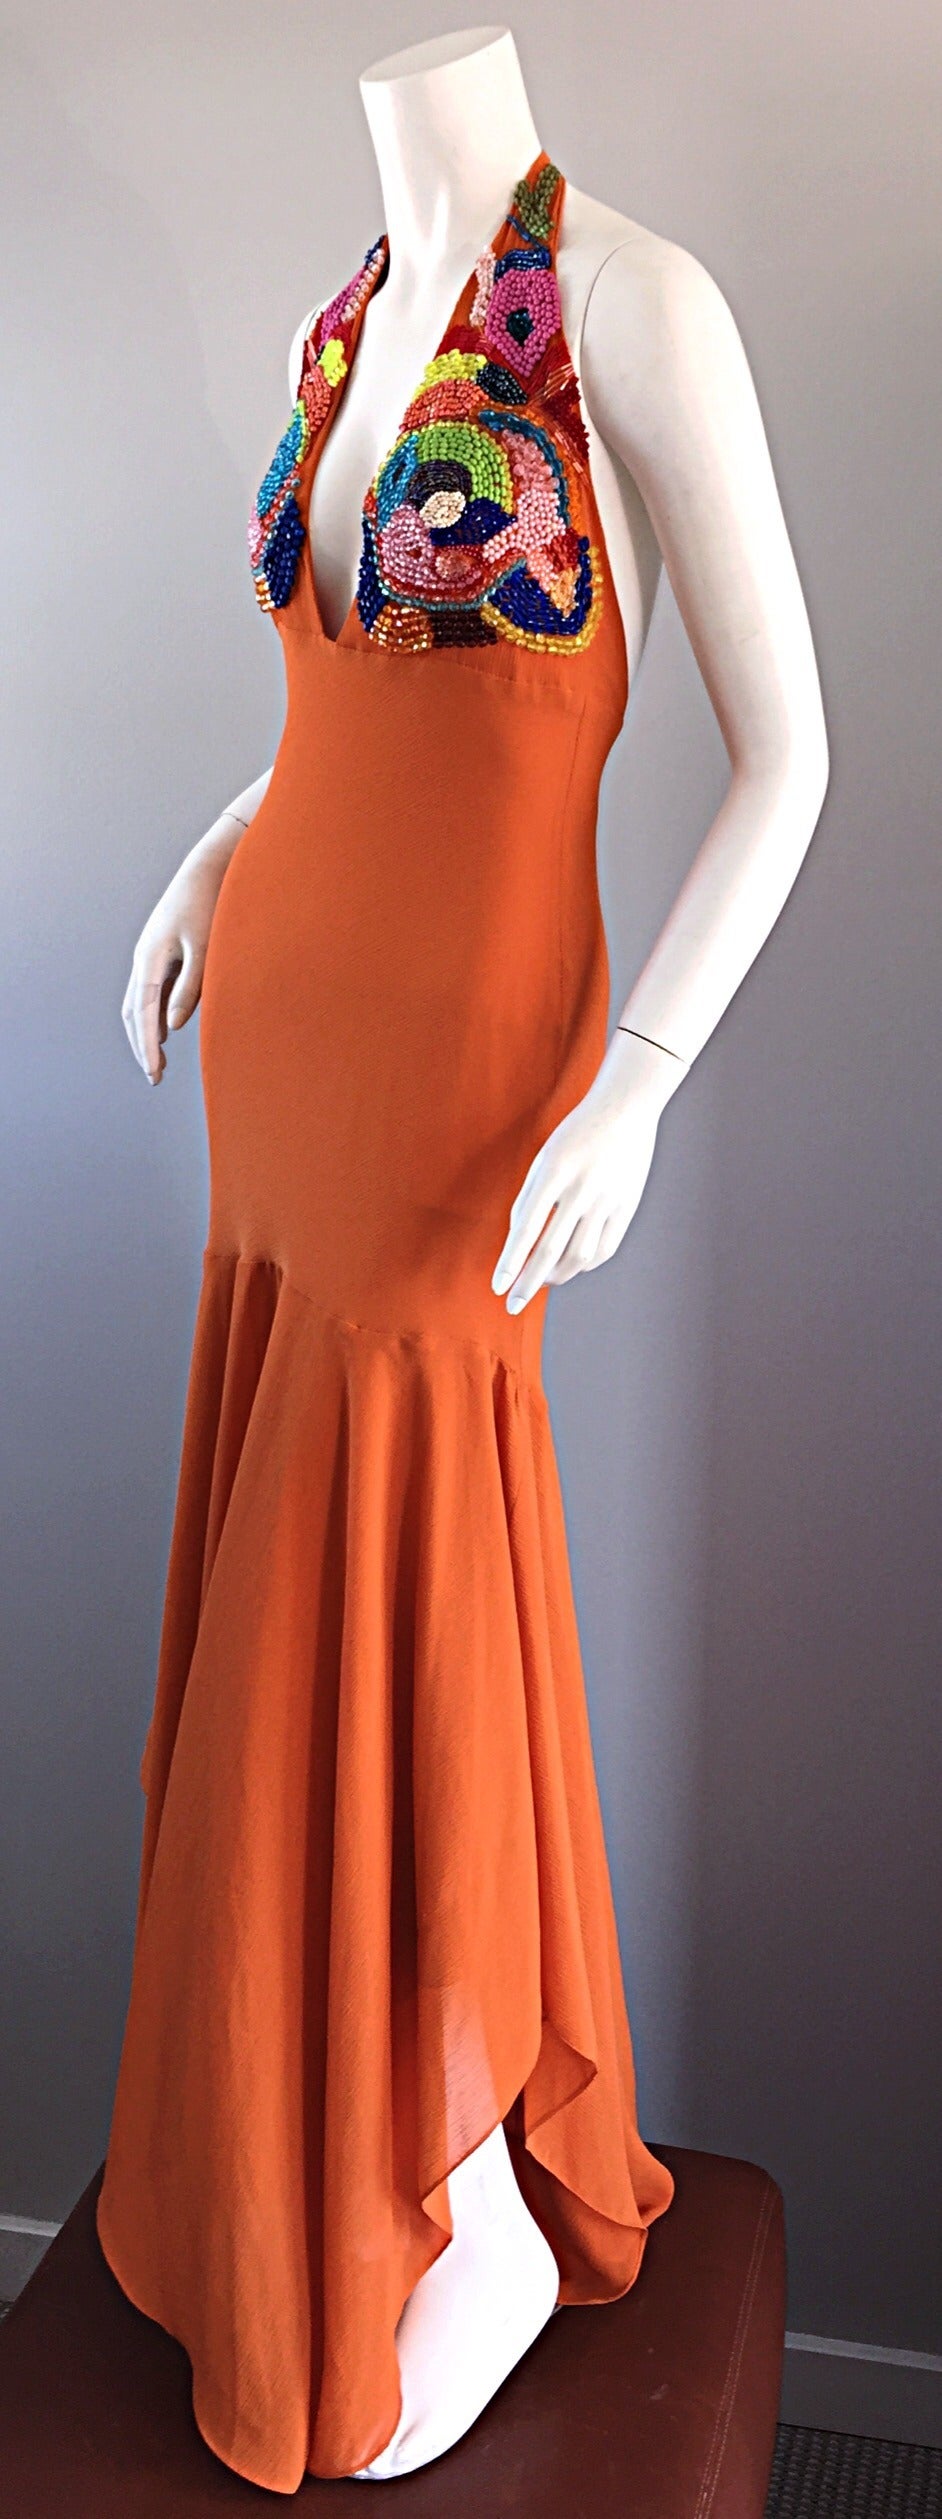 Sexy 1990s Silk Crepe Orange Mermaid Gown 90s Vintage Maxi Dress Vibrant Beading In Excellent Condition For Sale In San Diego, CA